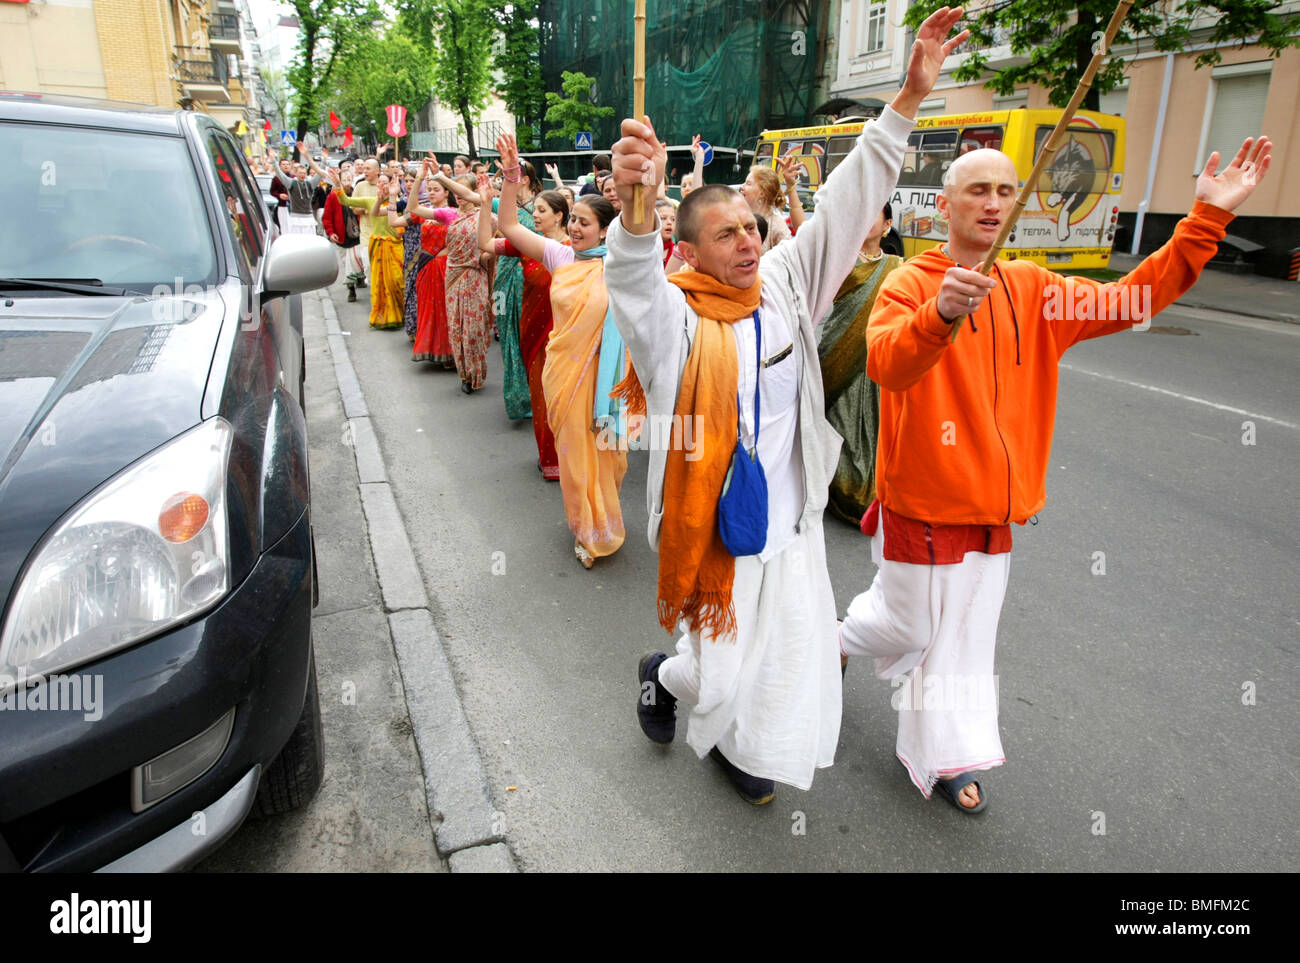 Hare Krishna Followers Singings March Editorial Photo - Image of